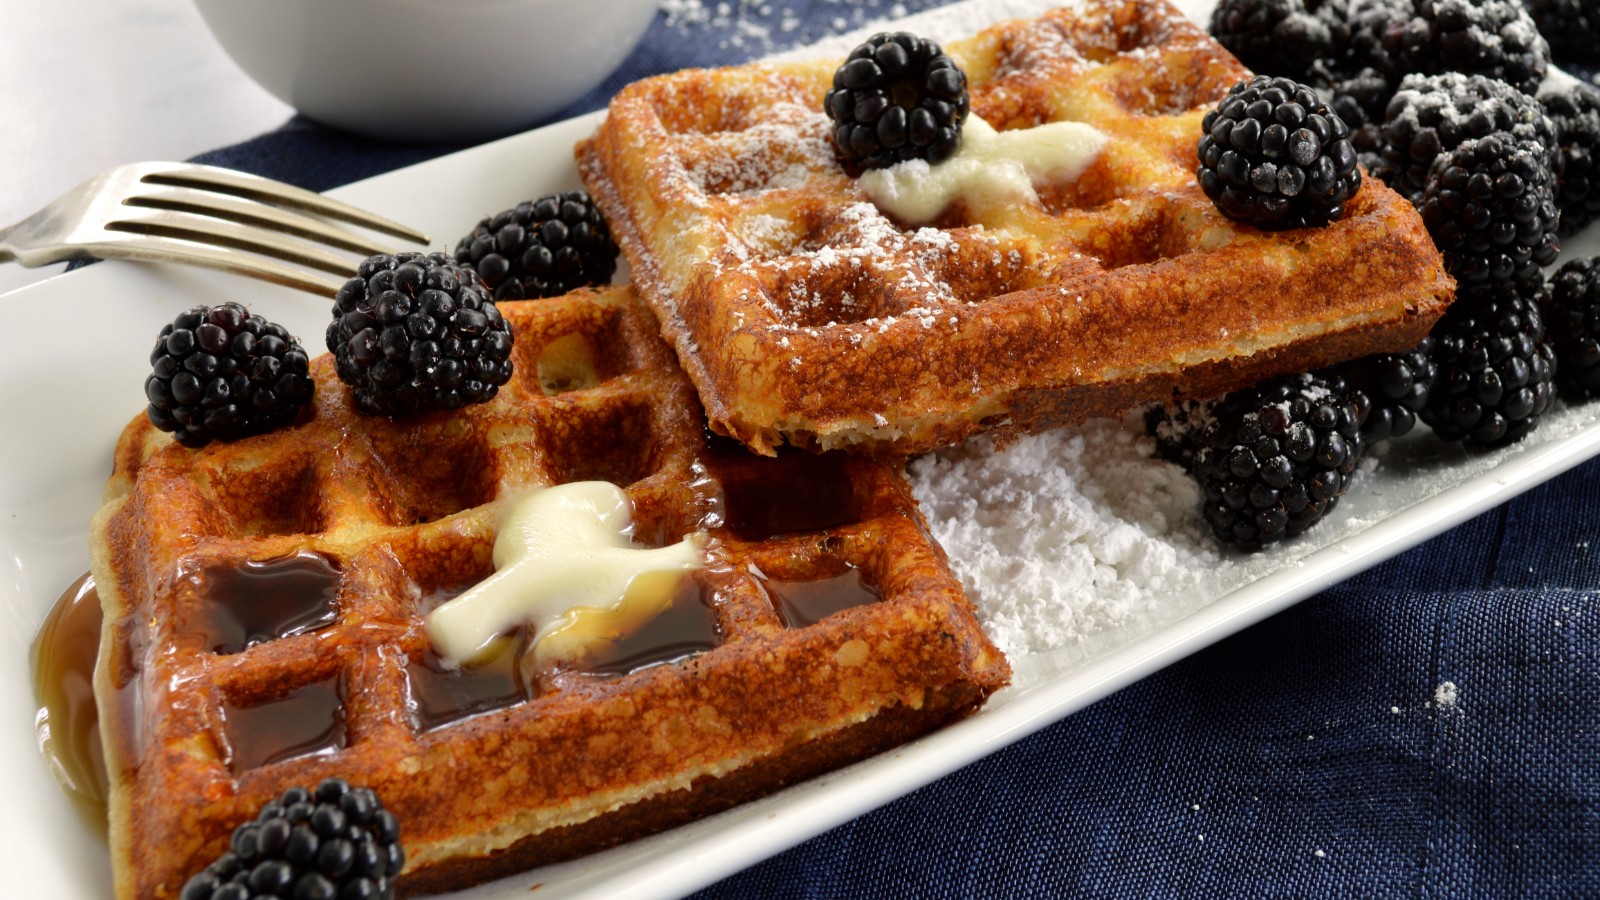 Image of Buttermilk Waffles